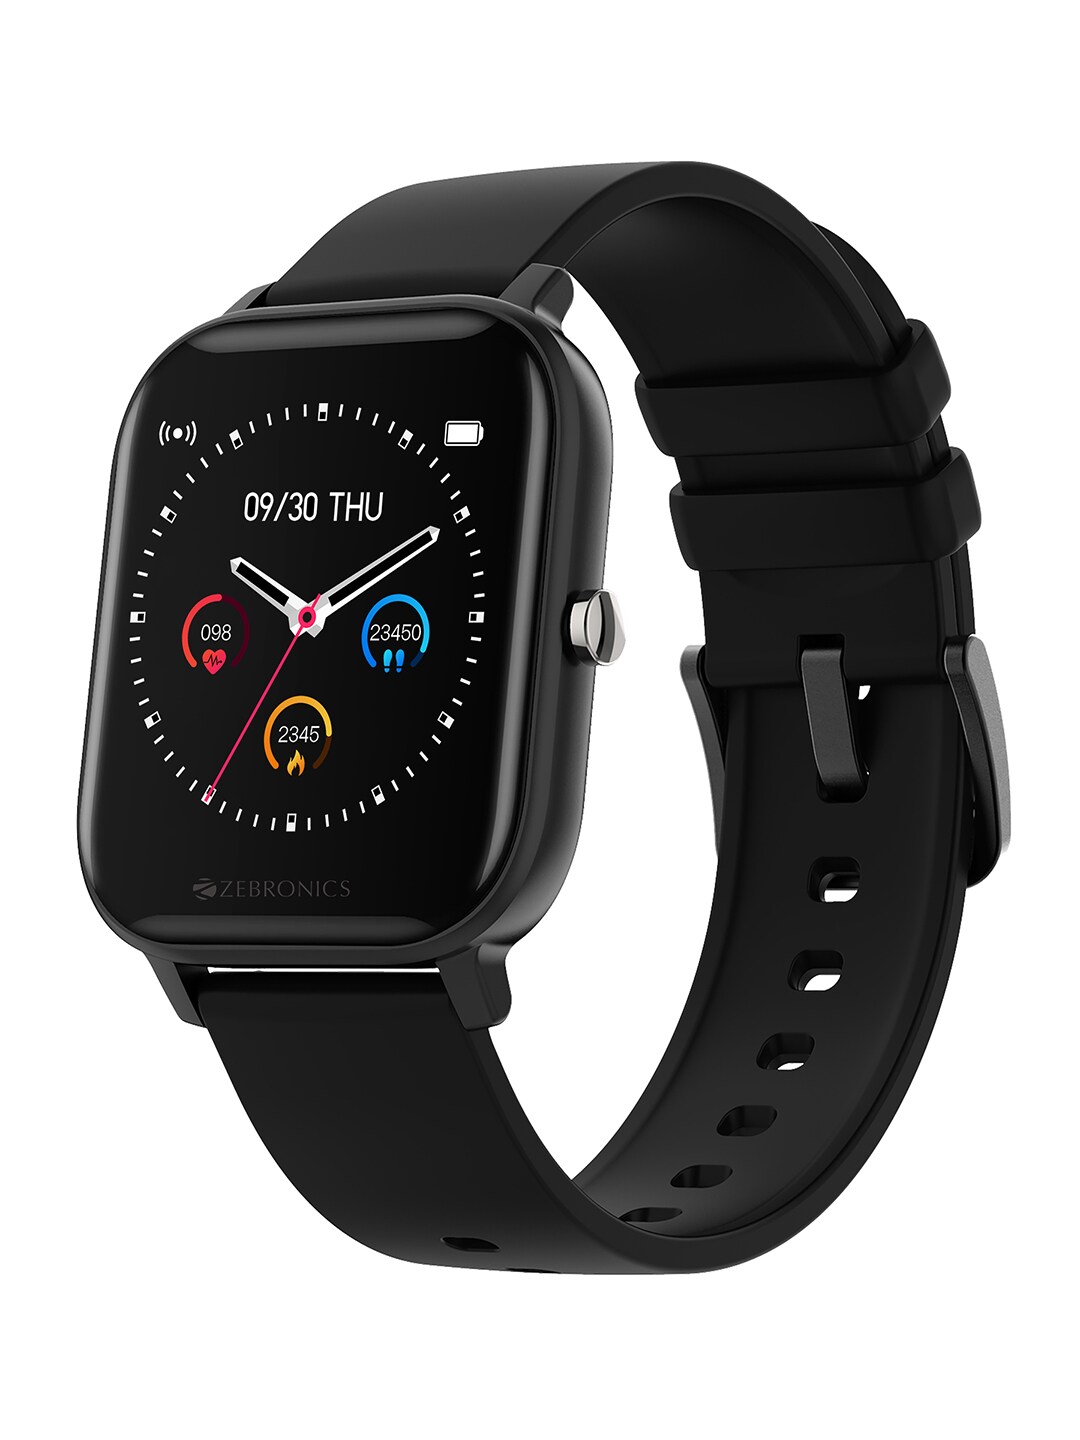 ZEBRONICS Black Fit 920CH Smart Watch Price in India